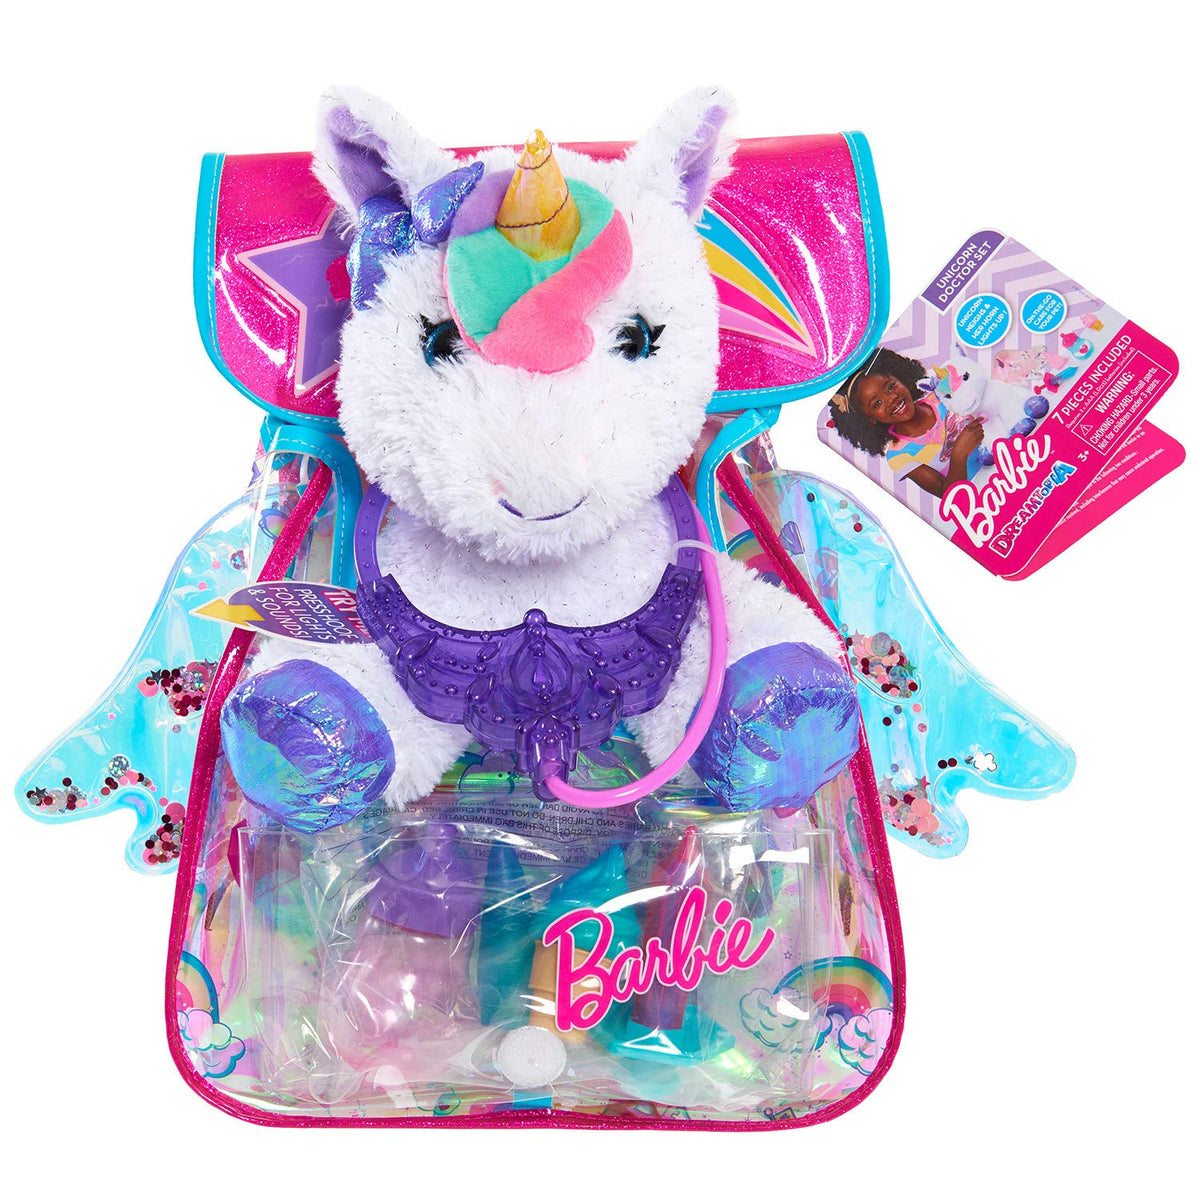 Barbie Dreamtopia Kiss and Care Unicorn Pet Doctor, Kids Toys for Ages 3 Up by Just Play